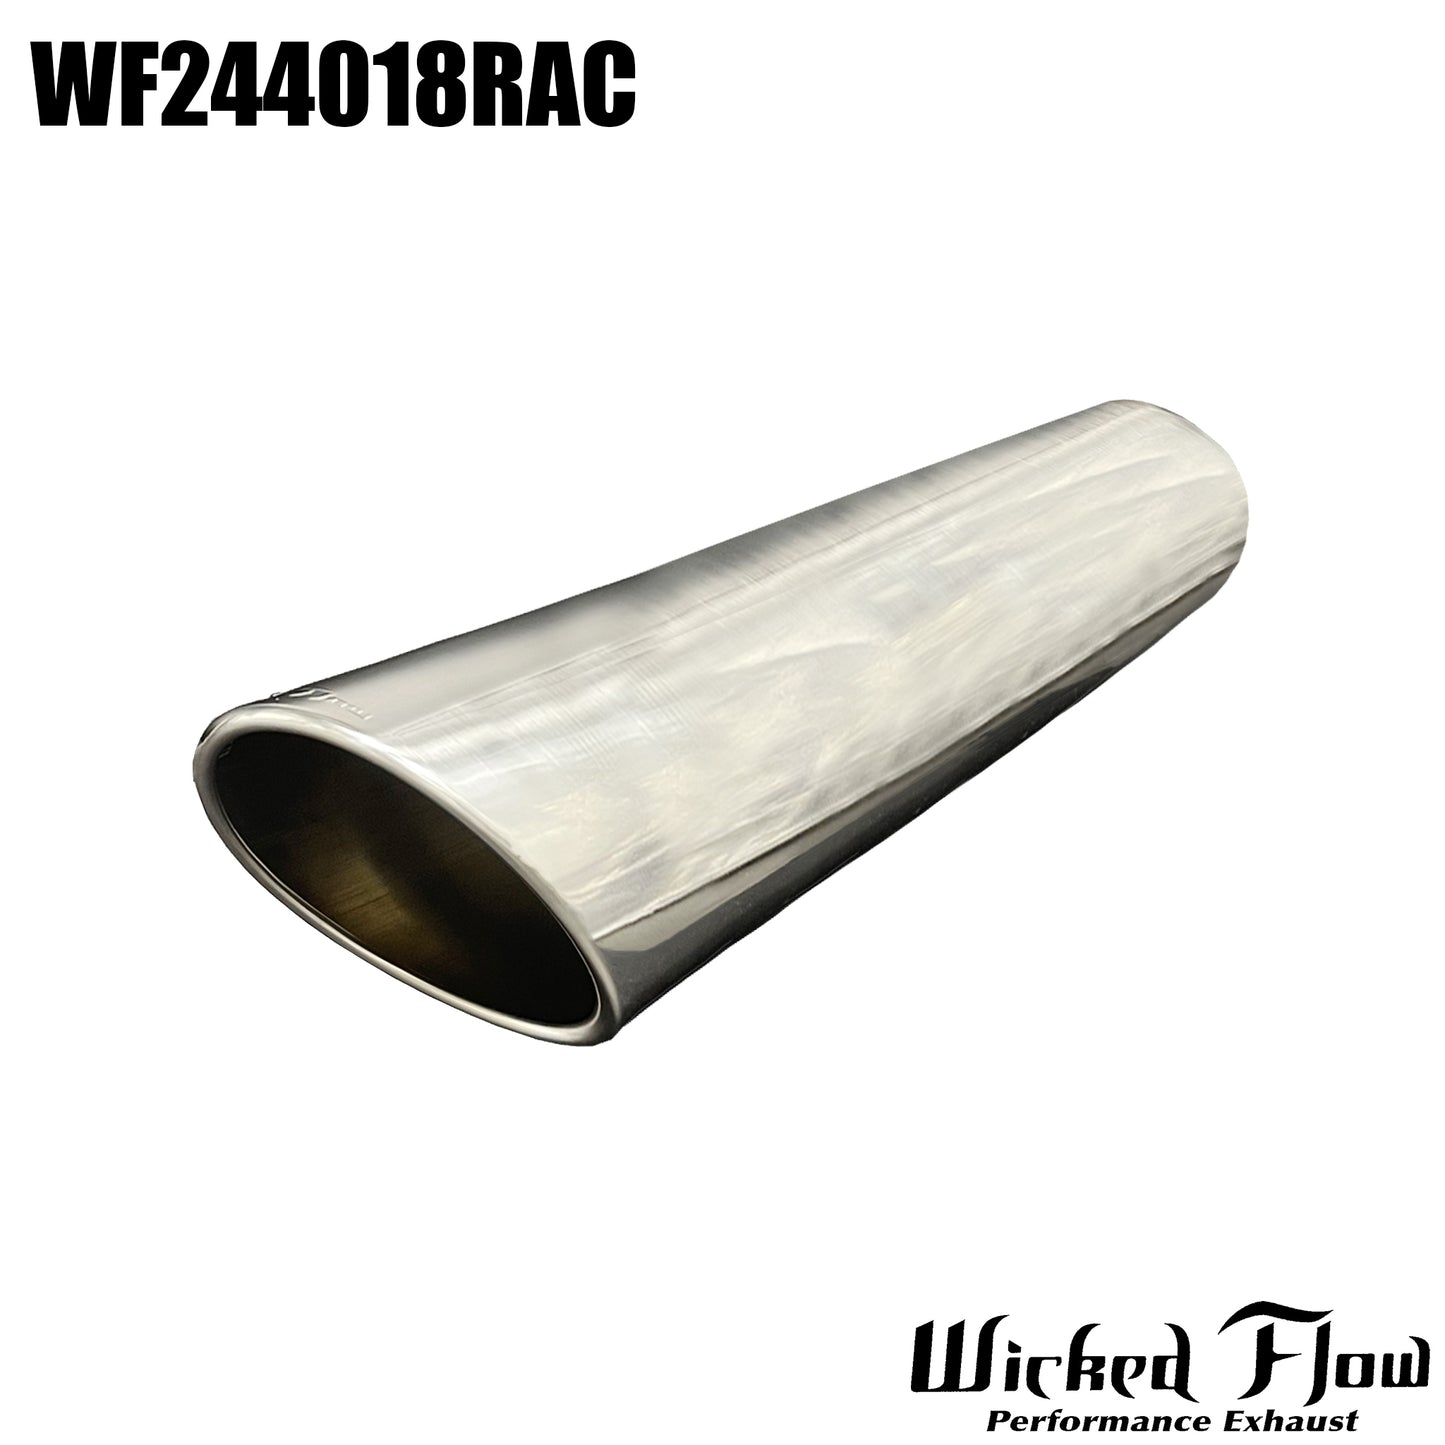 WF244018RAC - EXHAUST TIP - 2.25" Inlet 18" Length - ROLLED ANGLE CUT